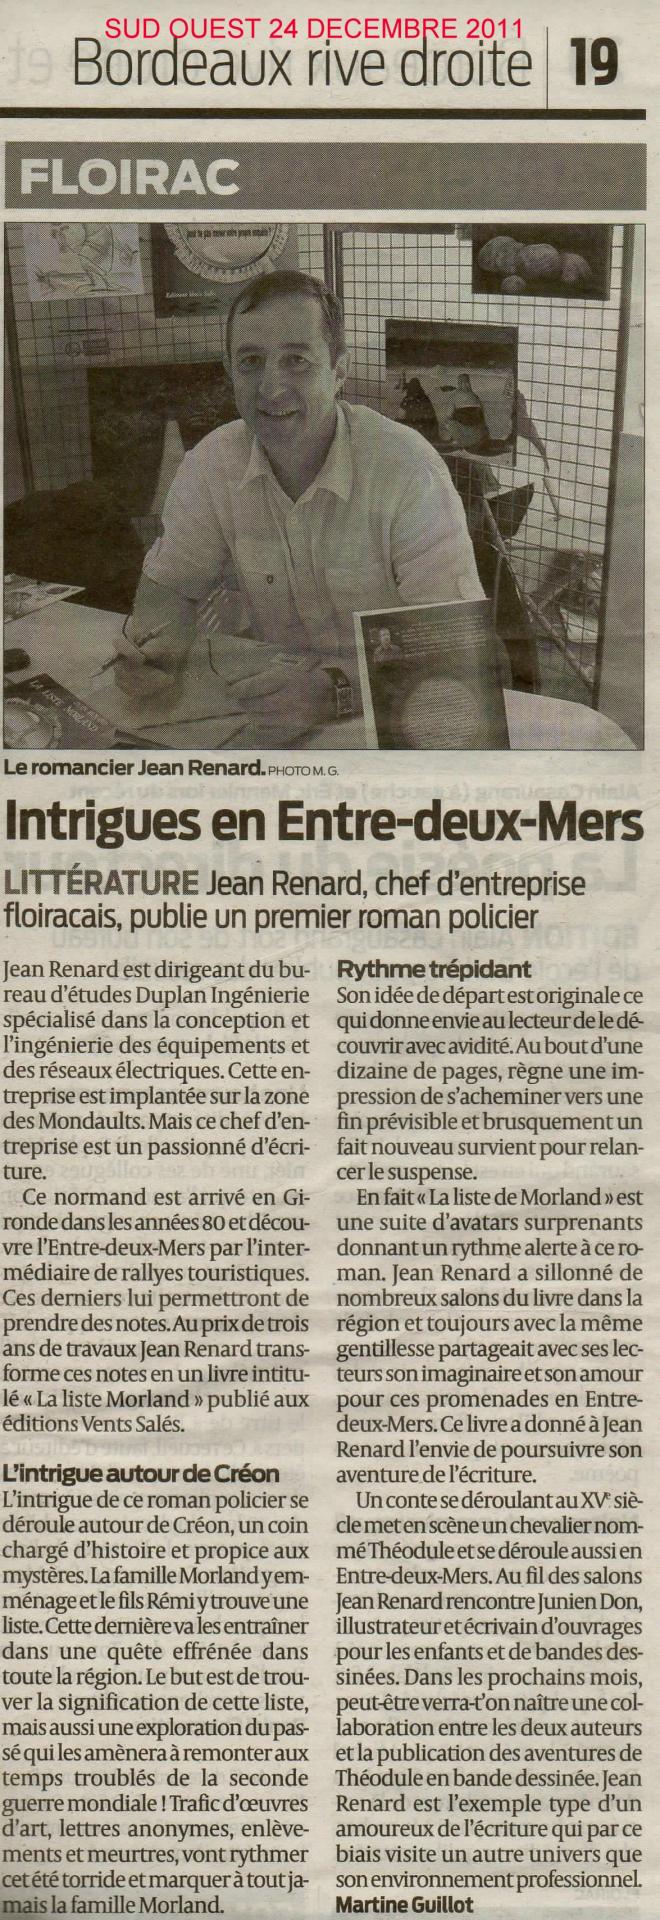 Article sud ouest 24 12 2011